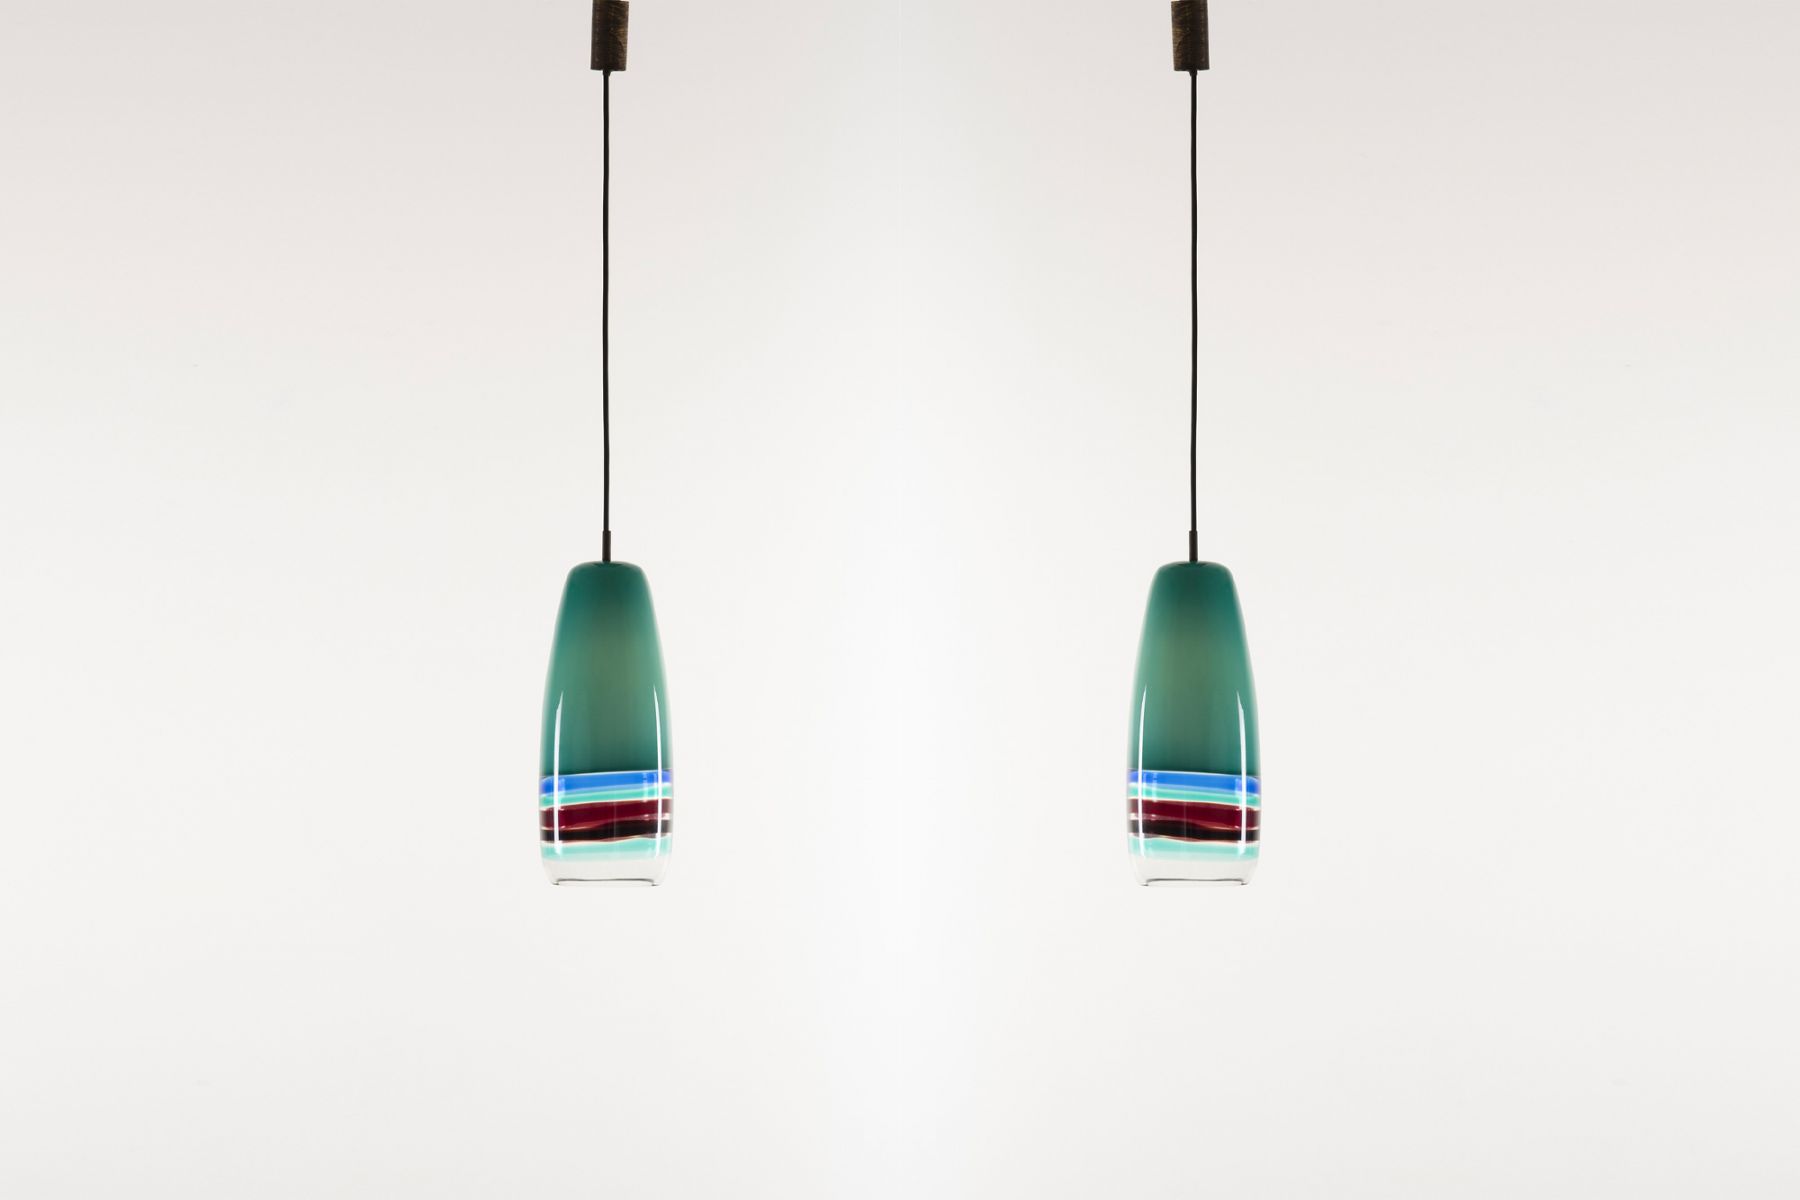 Two ceiling lamps Massimo Vignelli pic-1